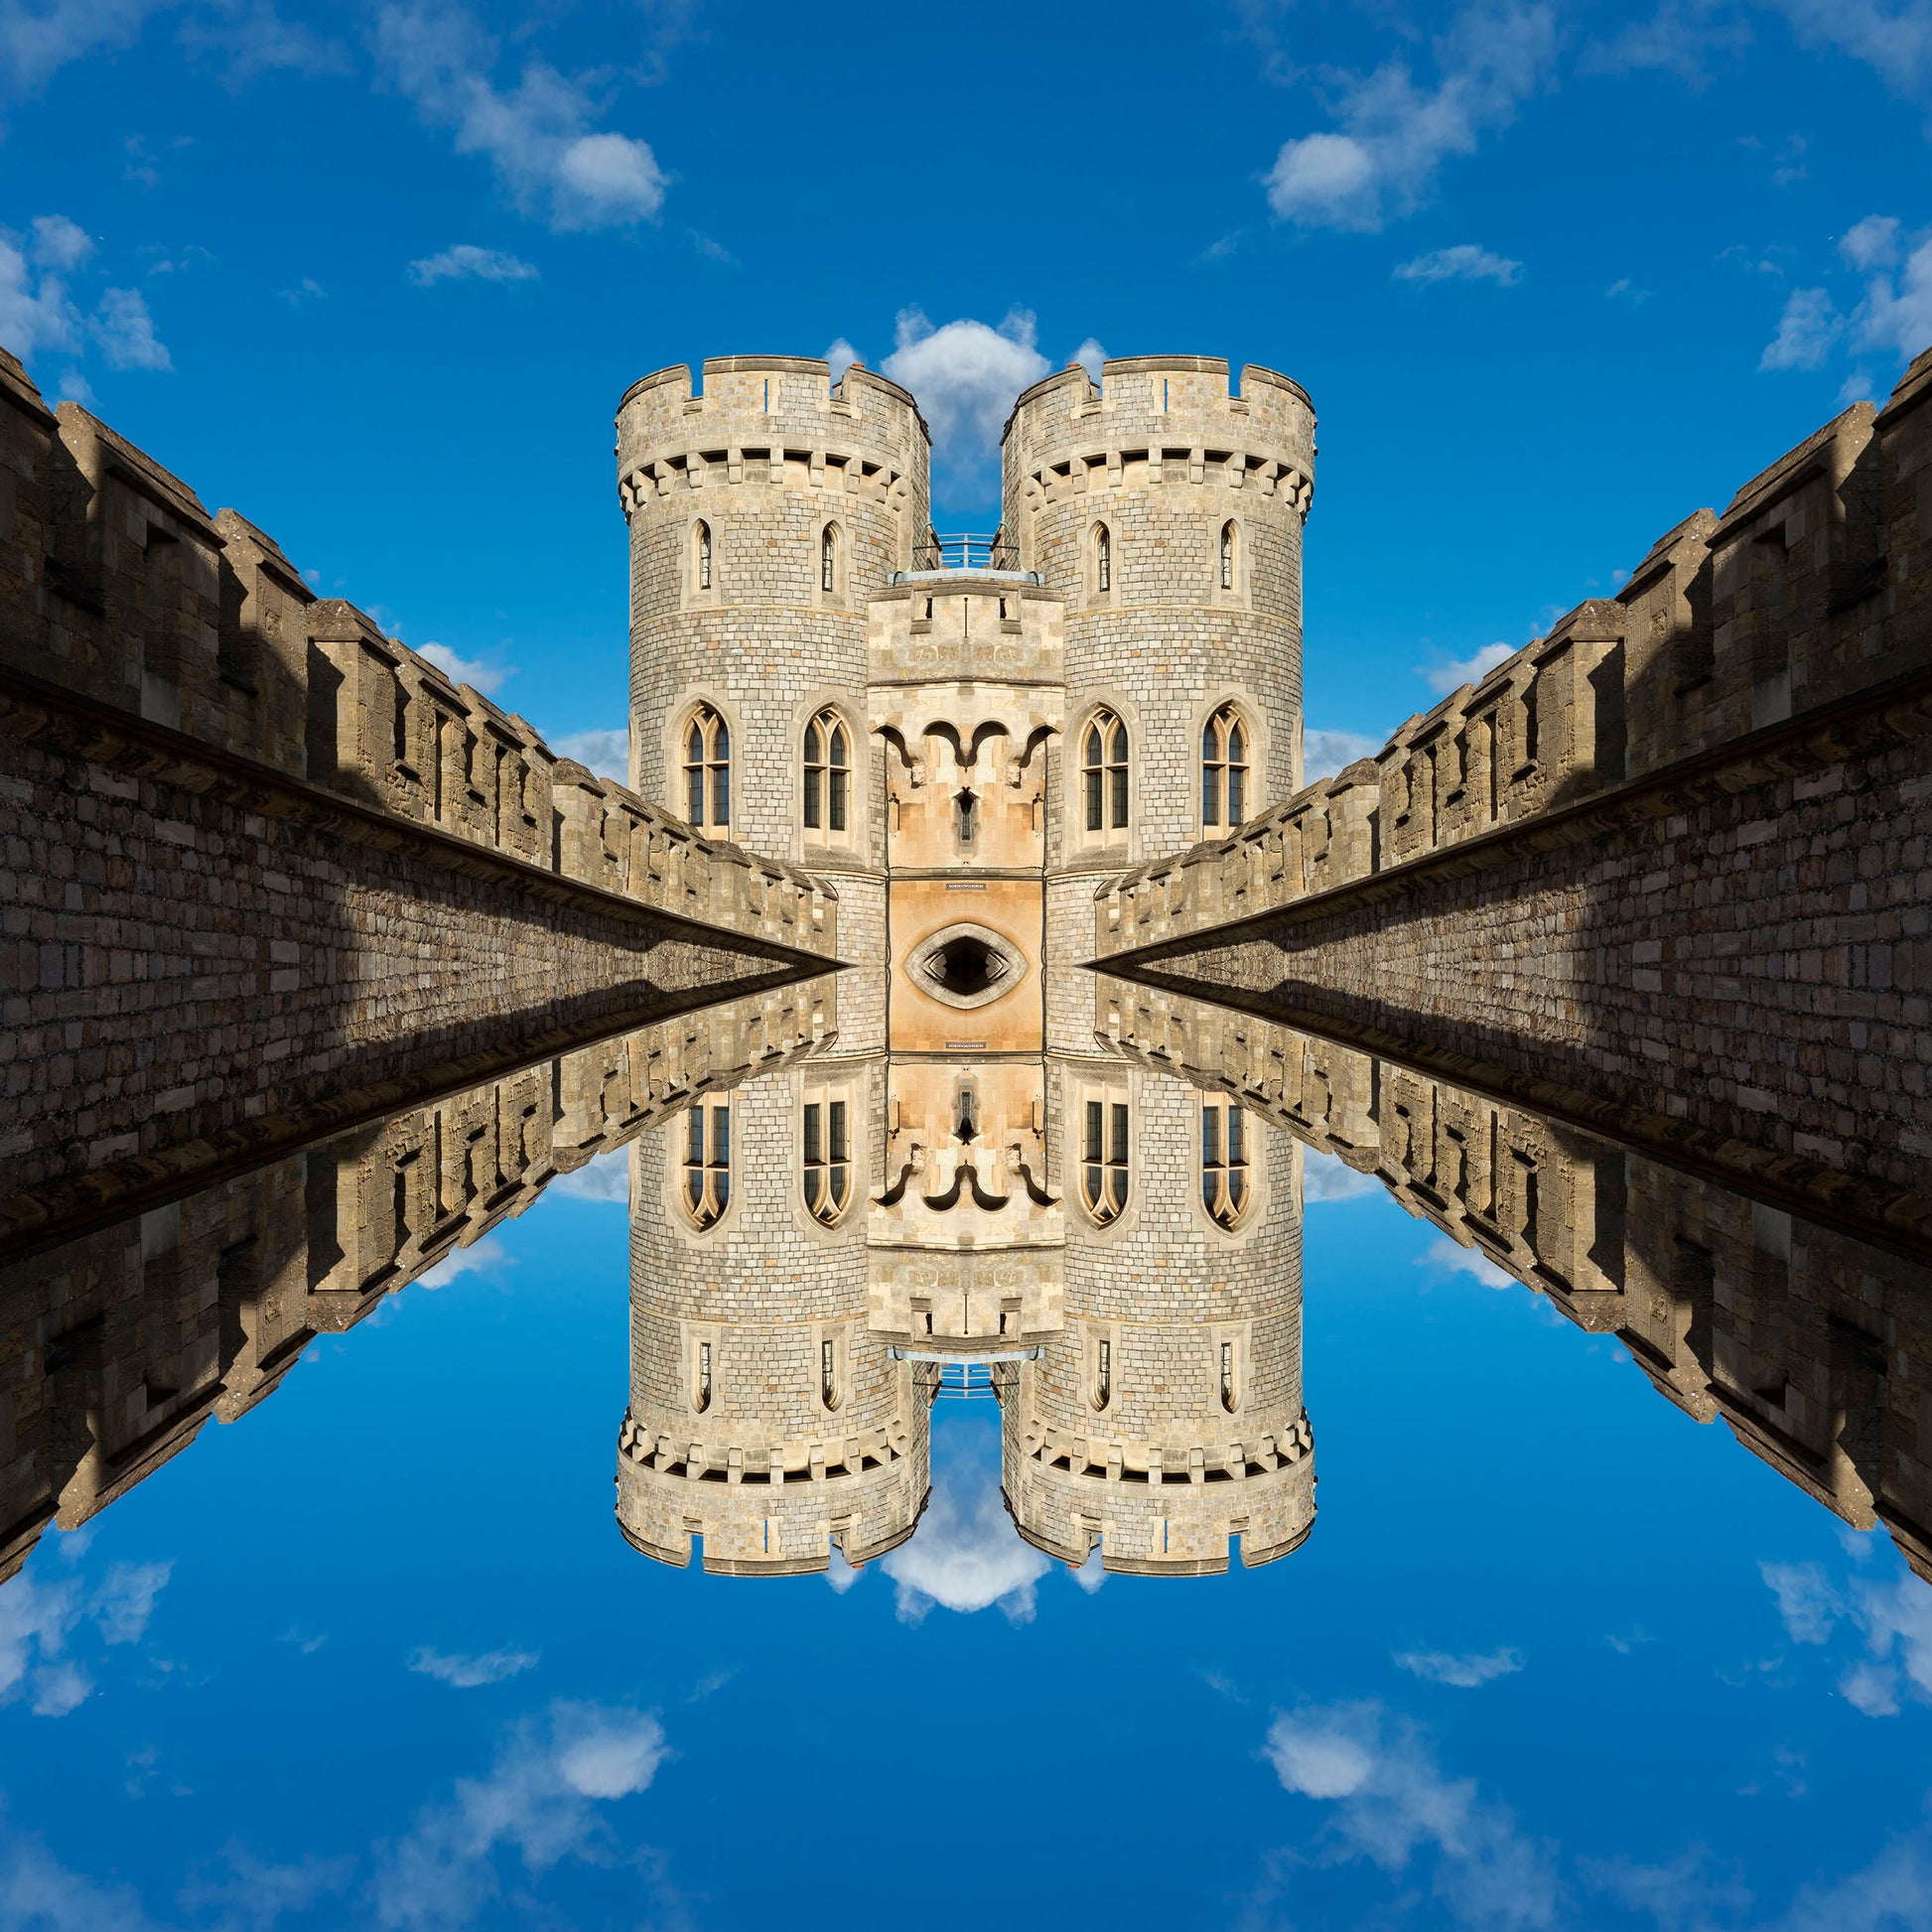 Daniel-Sambraus-Windsor-Castle-2-Limited-Edition-Digital-Photography-TAP-Galleries, Essex gallery 